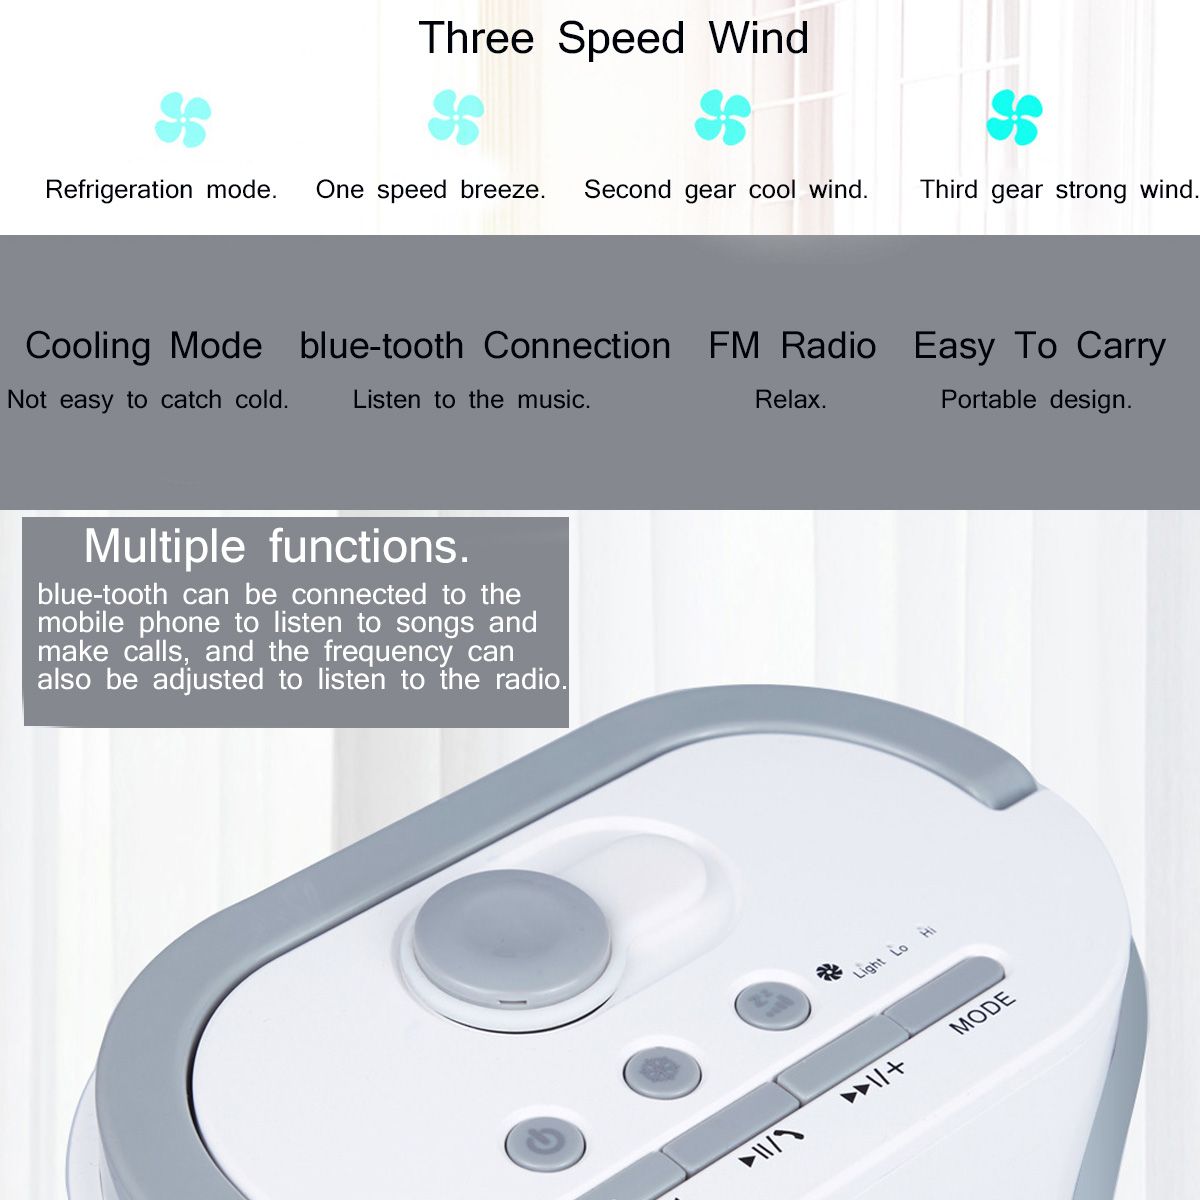 USB-Multifunction-Humidifier-Portable-Air-Conditioner-Fan-Cooling-bluetooth-Speaker-Gifts-for-Family-1675300